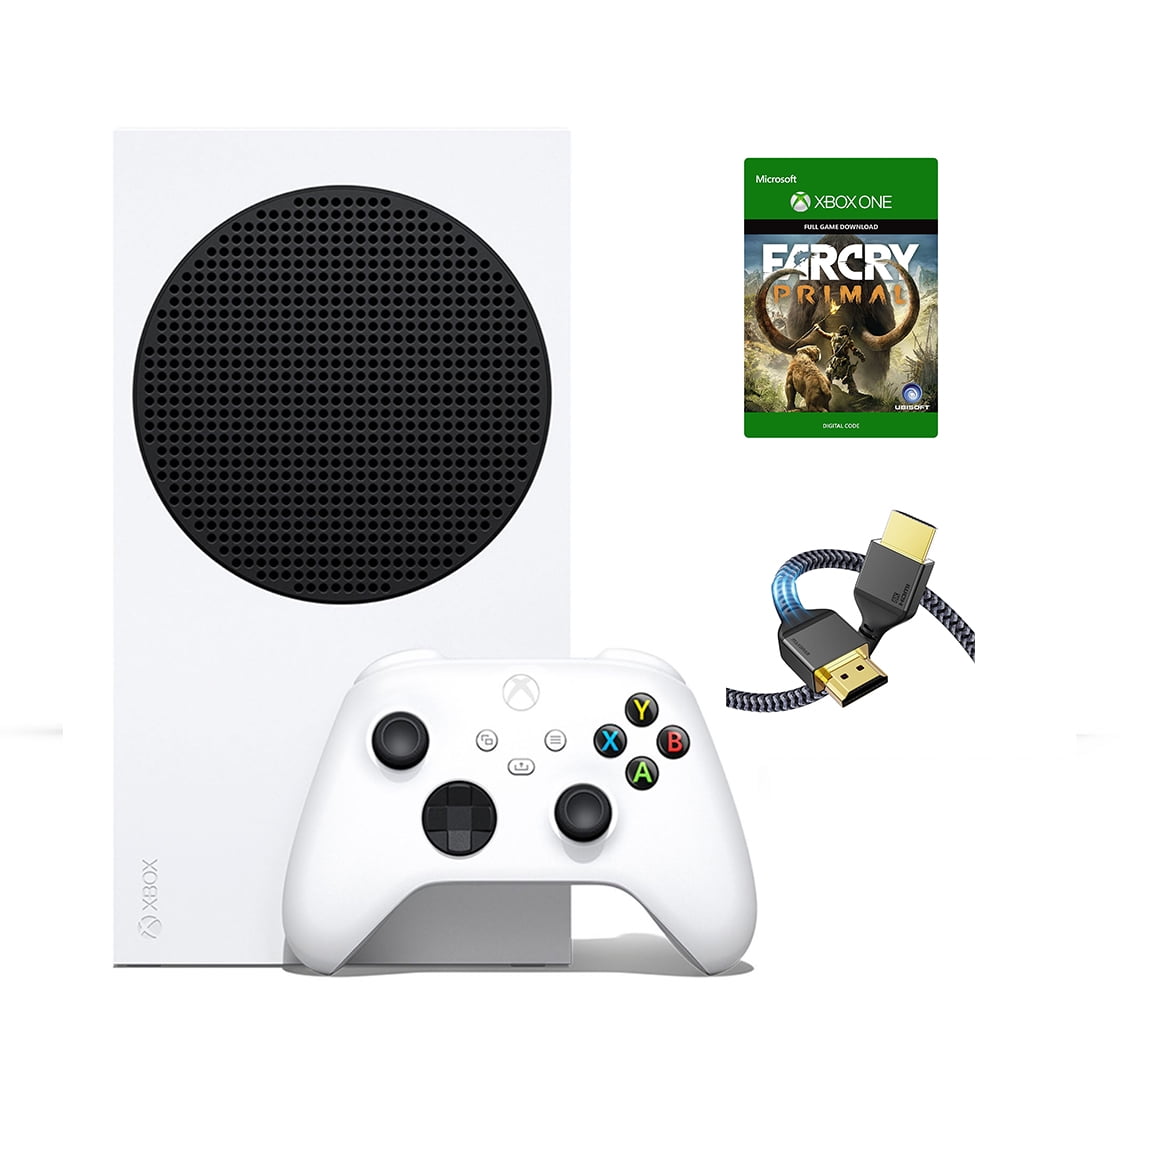 2023 Newest Microsoft Xbox Series X–Gaming Console System- 1TB SSD Black X  Version with Disc Drive Bundle with Far Cry Primal Full Game and NSSDC4  High Speed HDMI Cabel 